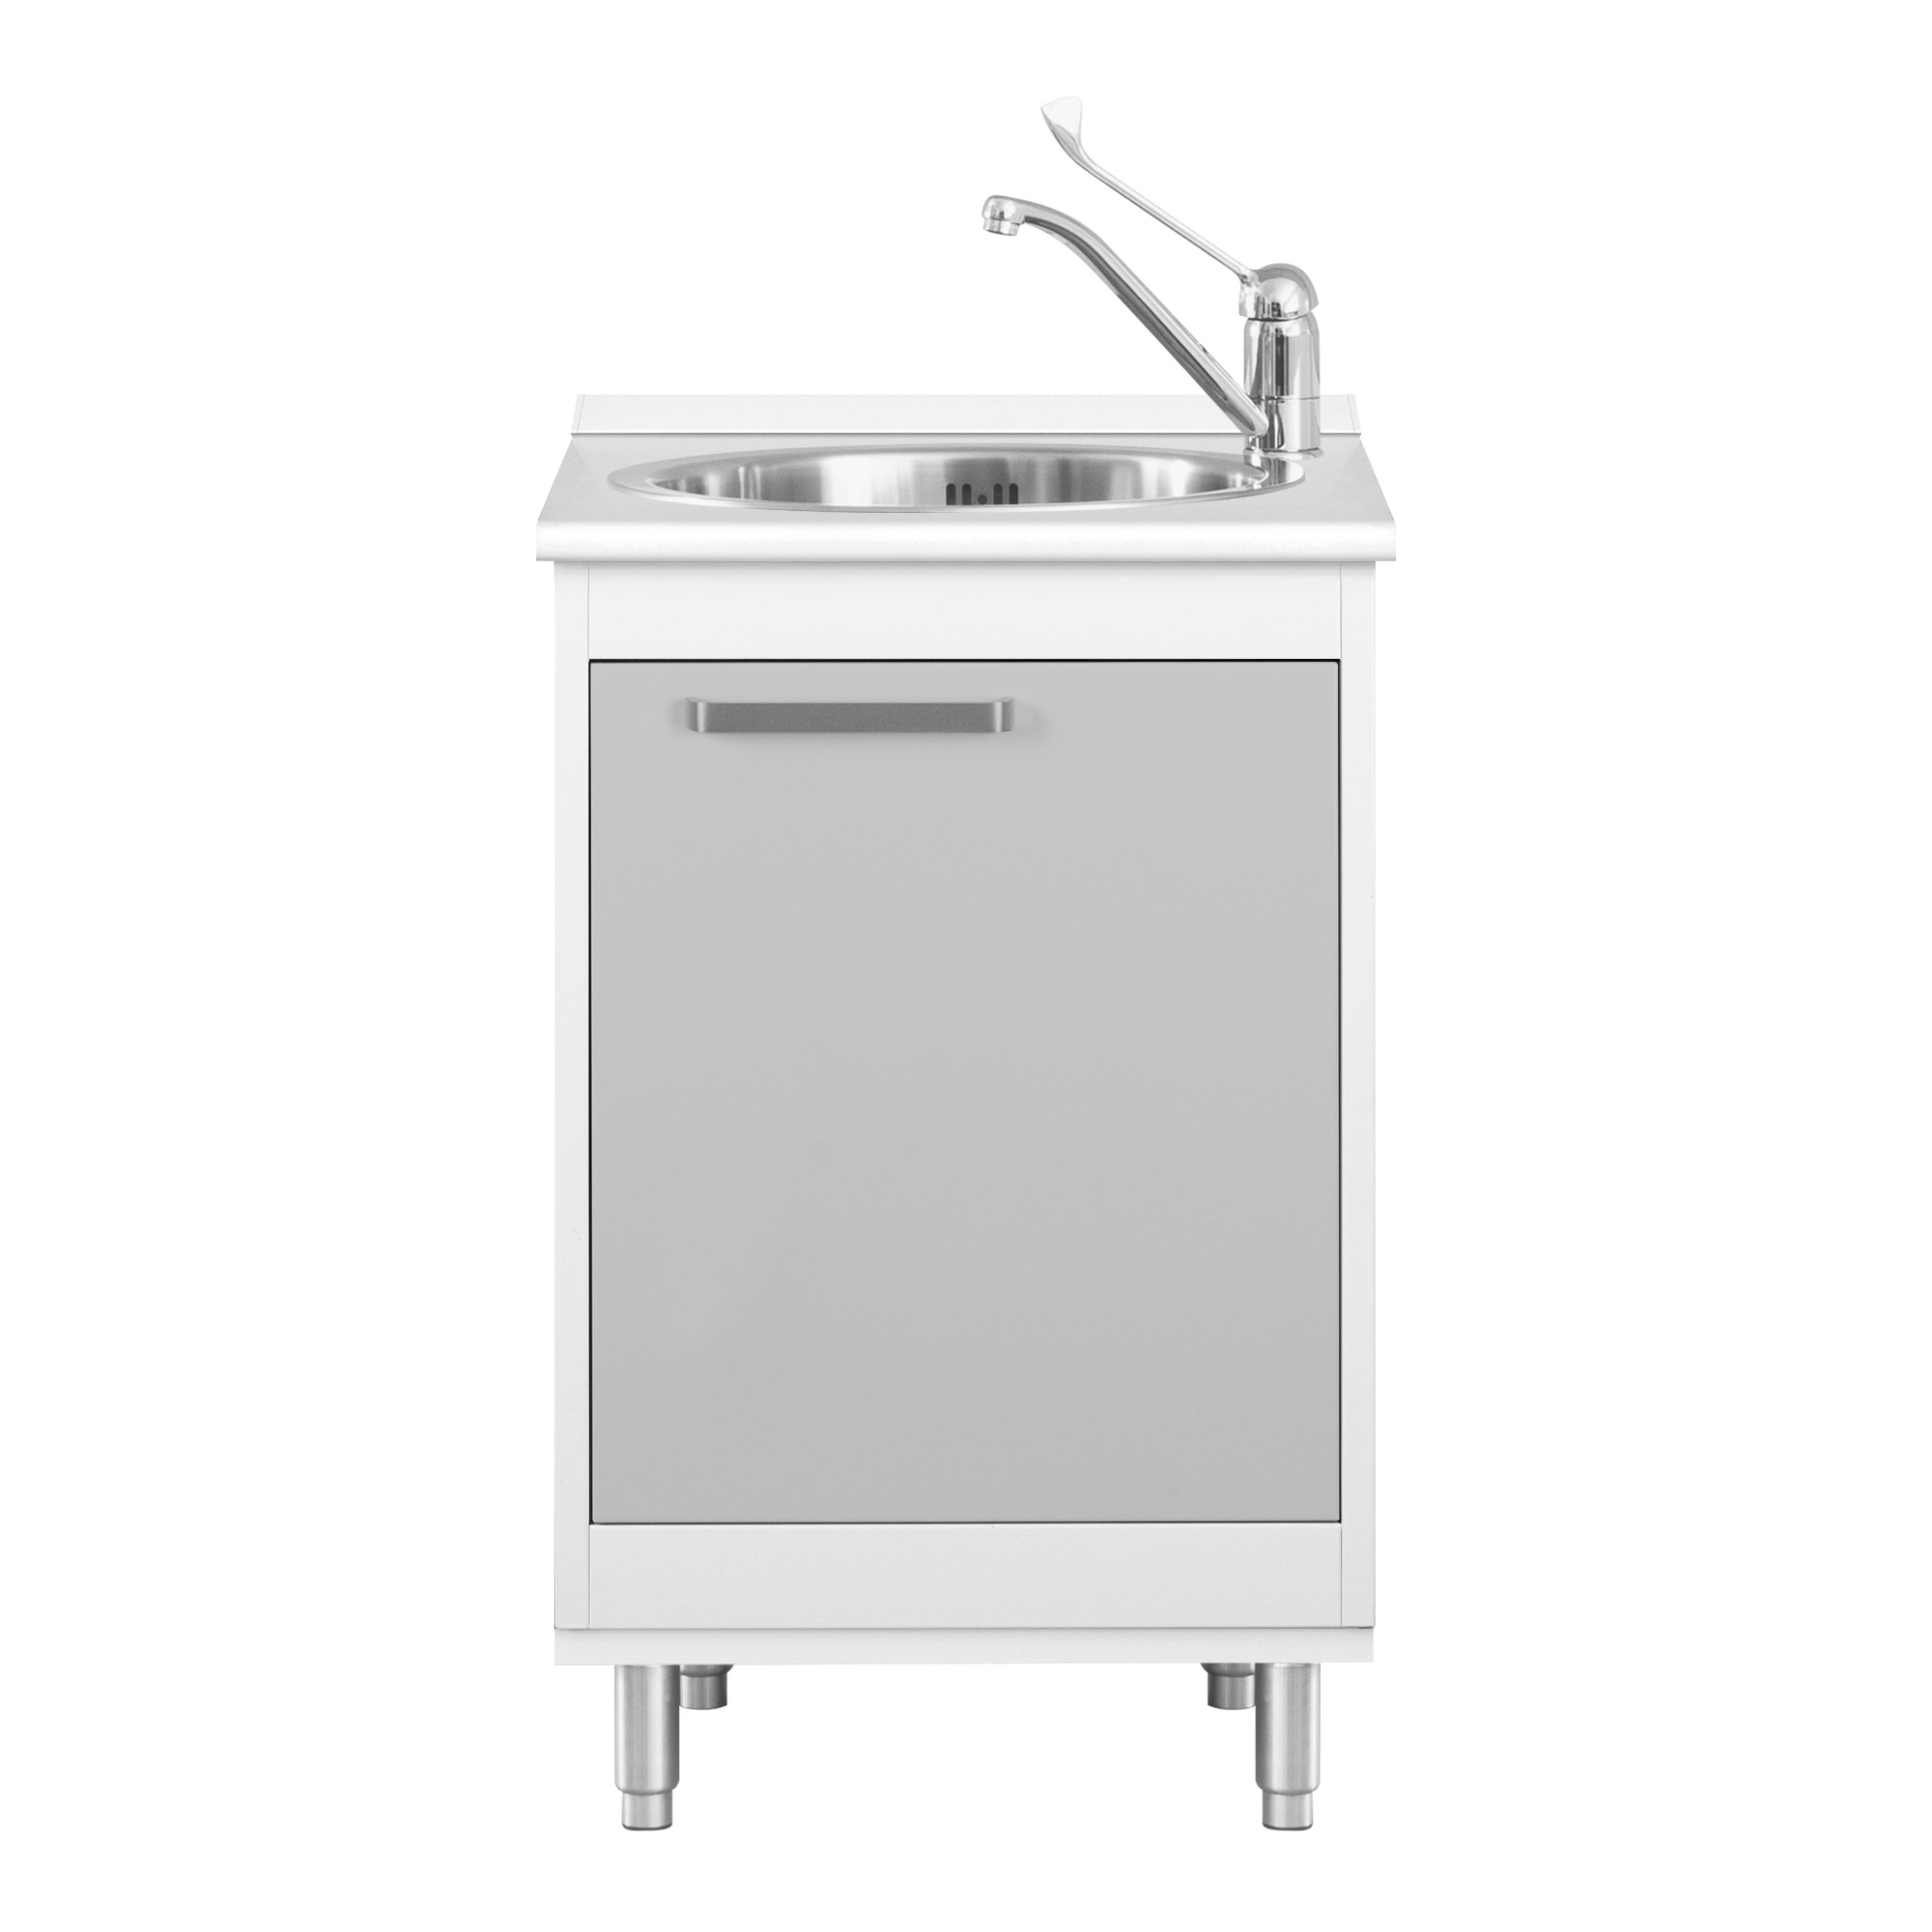 Module with stainless steel sink, mixer tap and feet